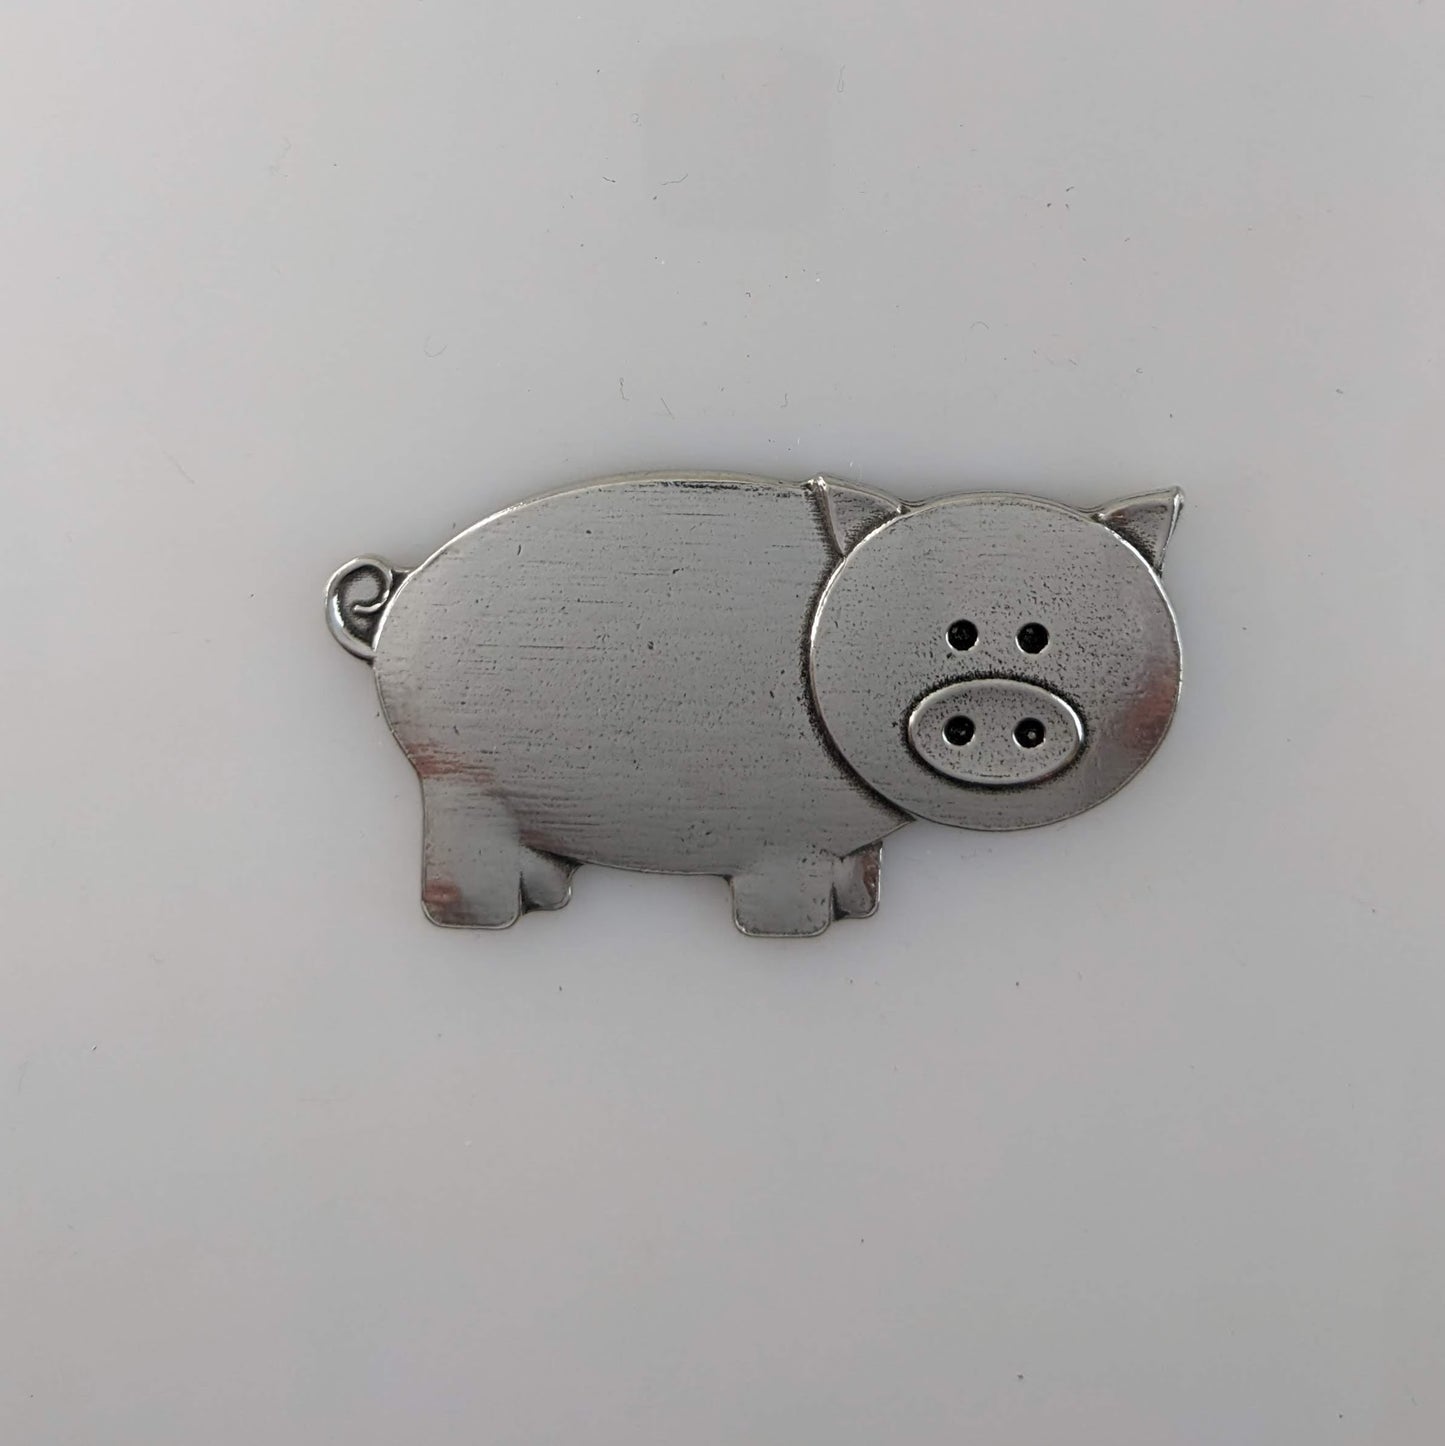 Peaches the Pig, pewter magnet